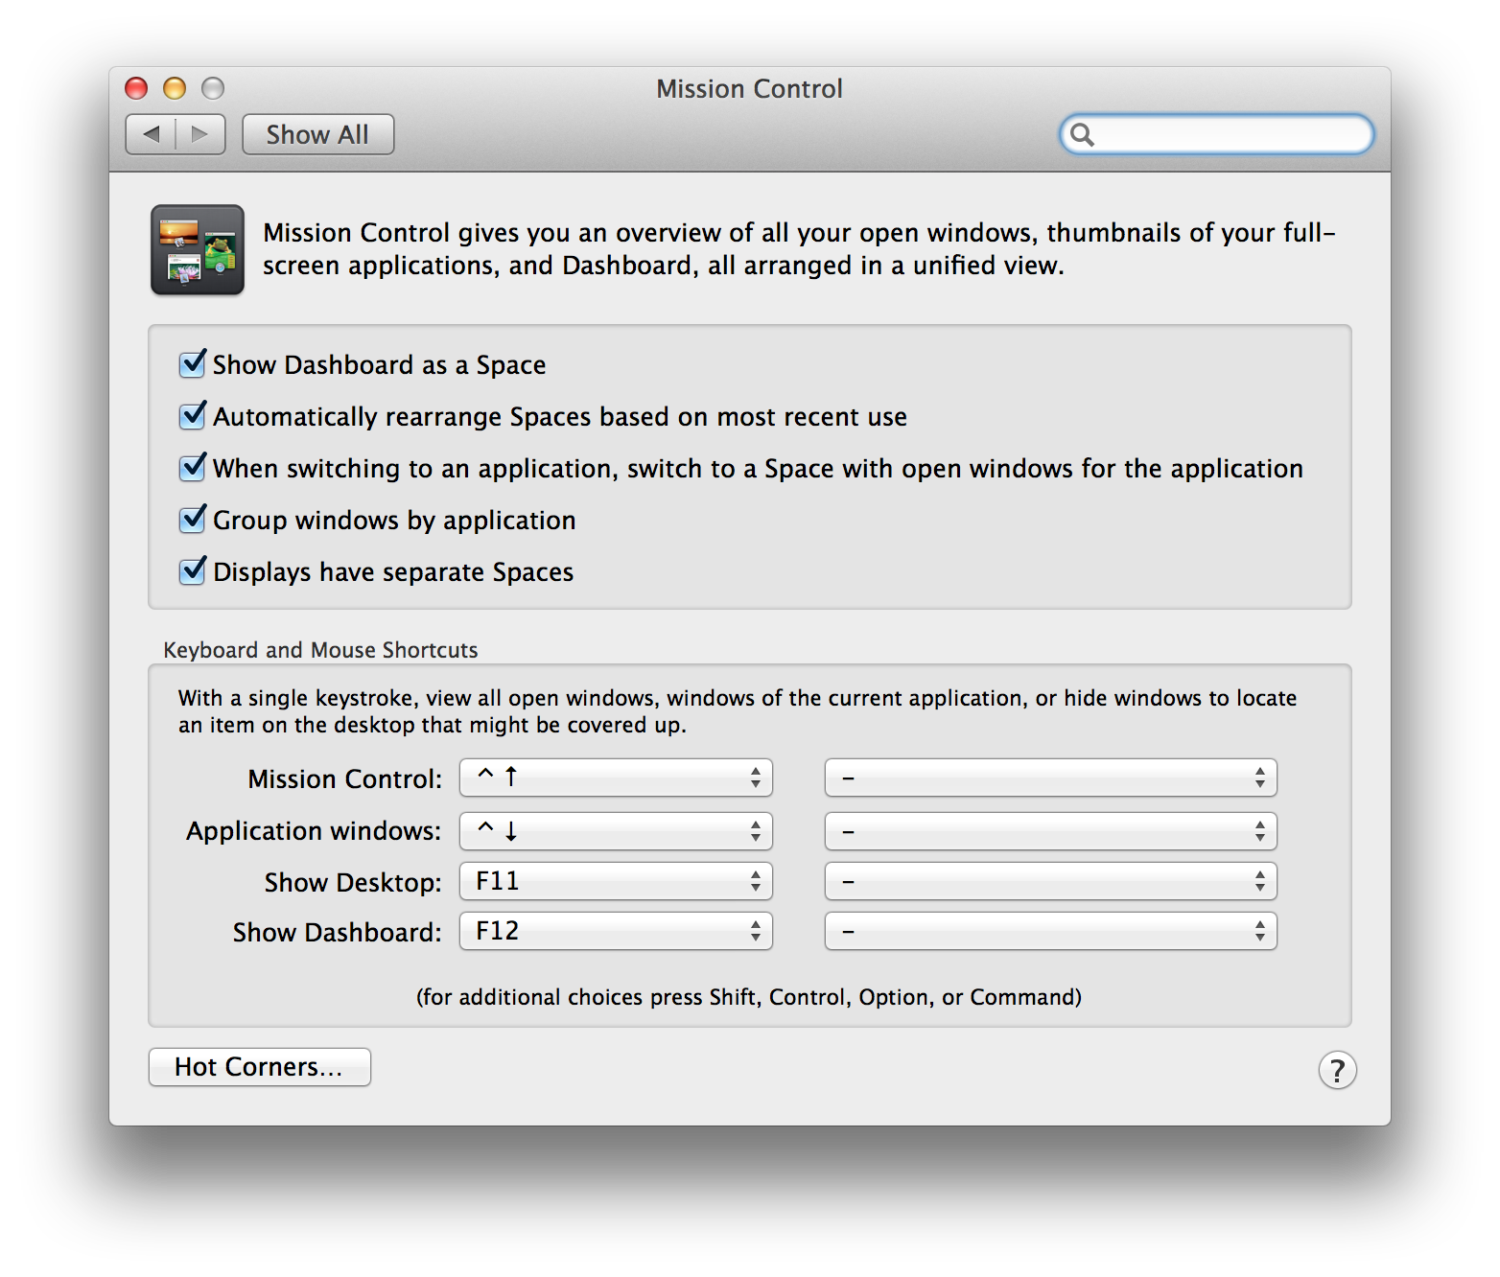 xvid codec for mac quicktime